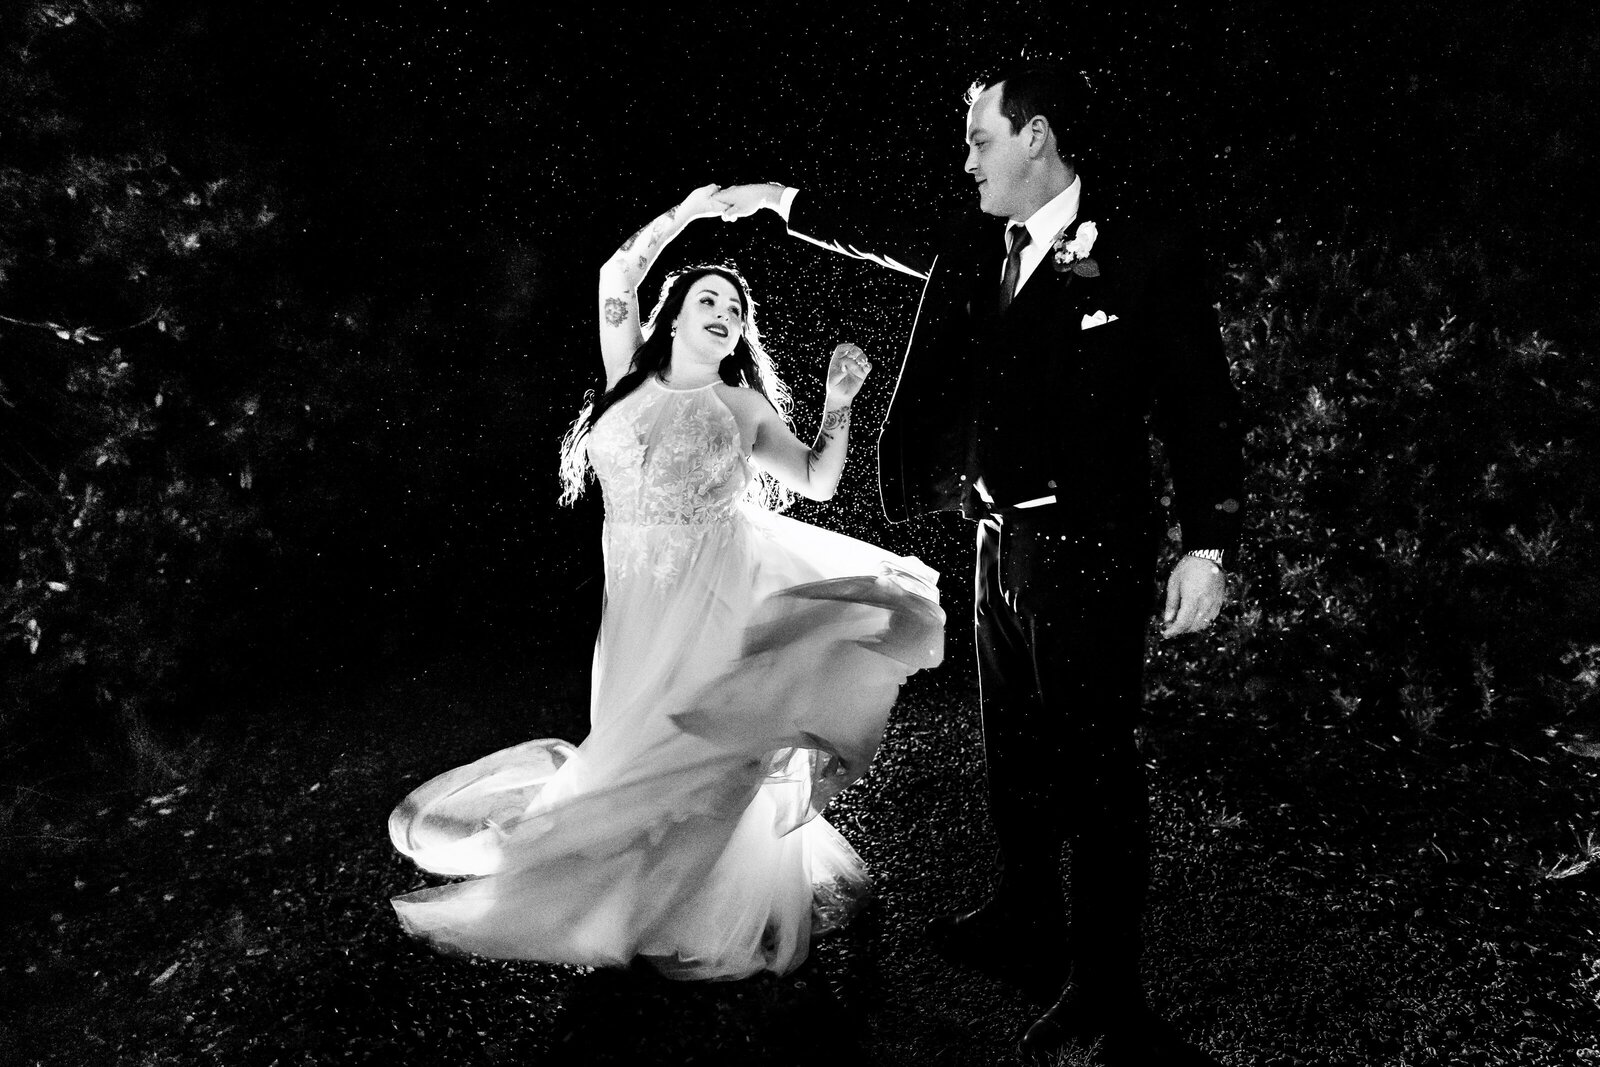 newlyweds dance in the dark in the rain in this creative wedding photo at night